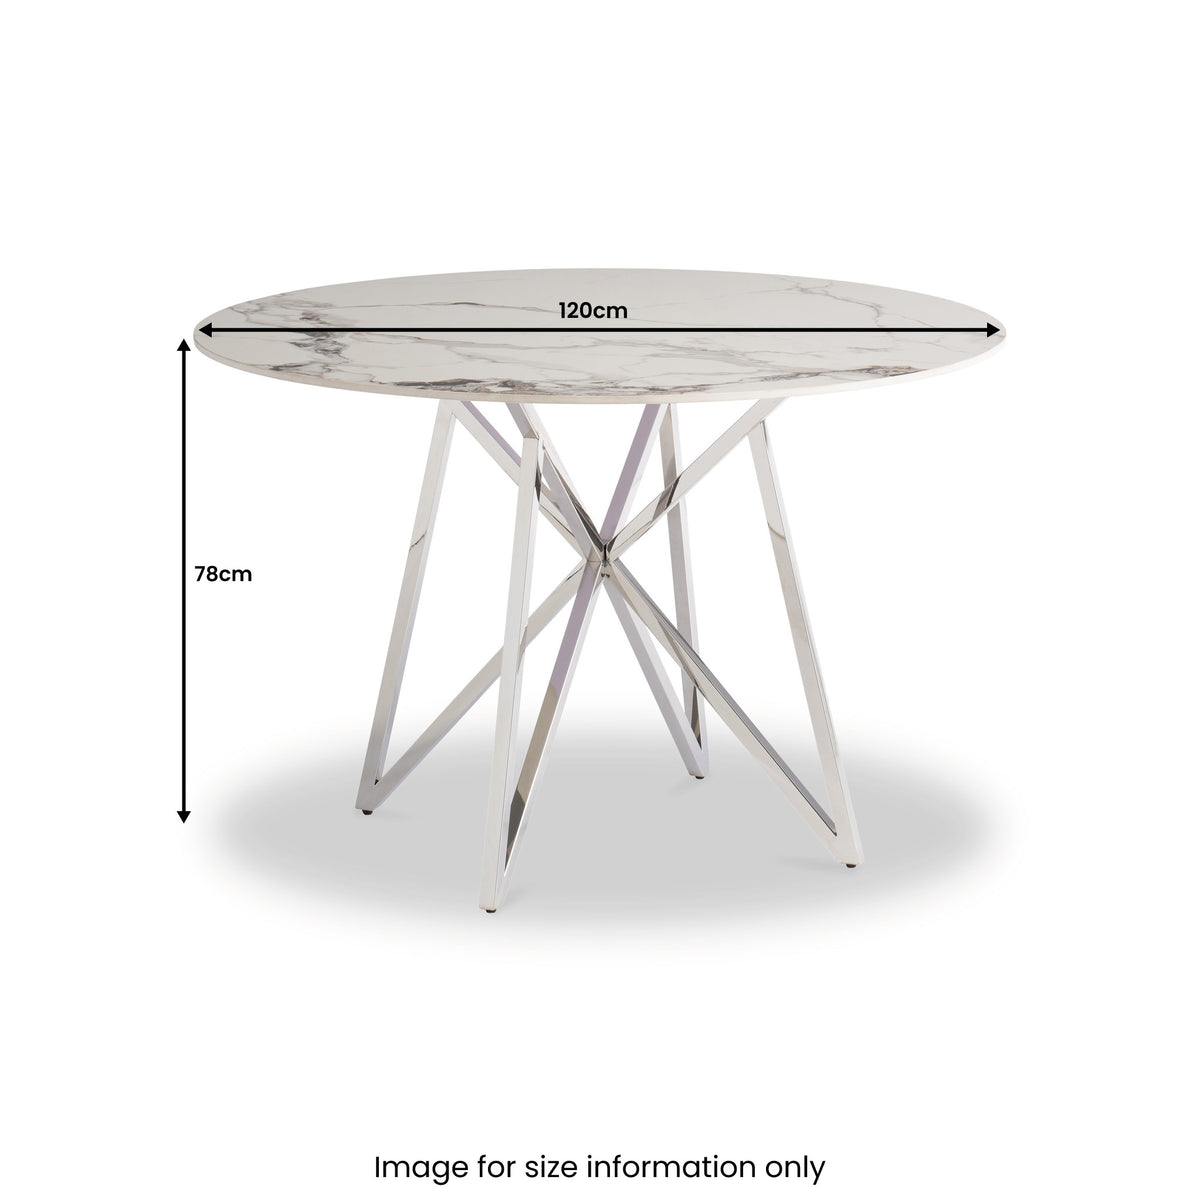 Carla White 1.2m Round Dining Table from Roseland Furniture